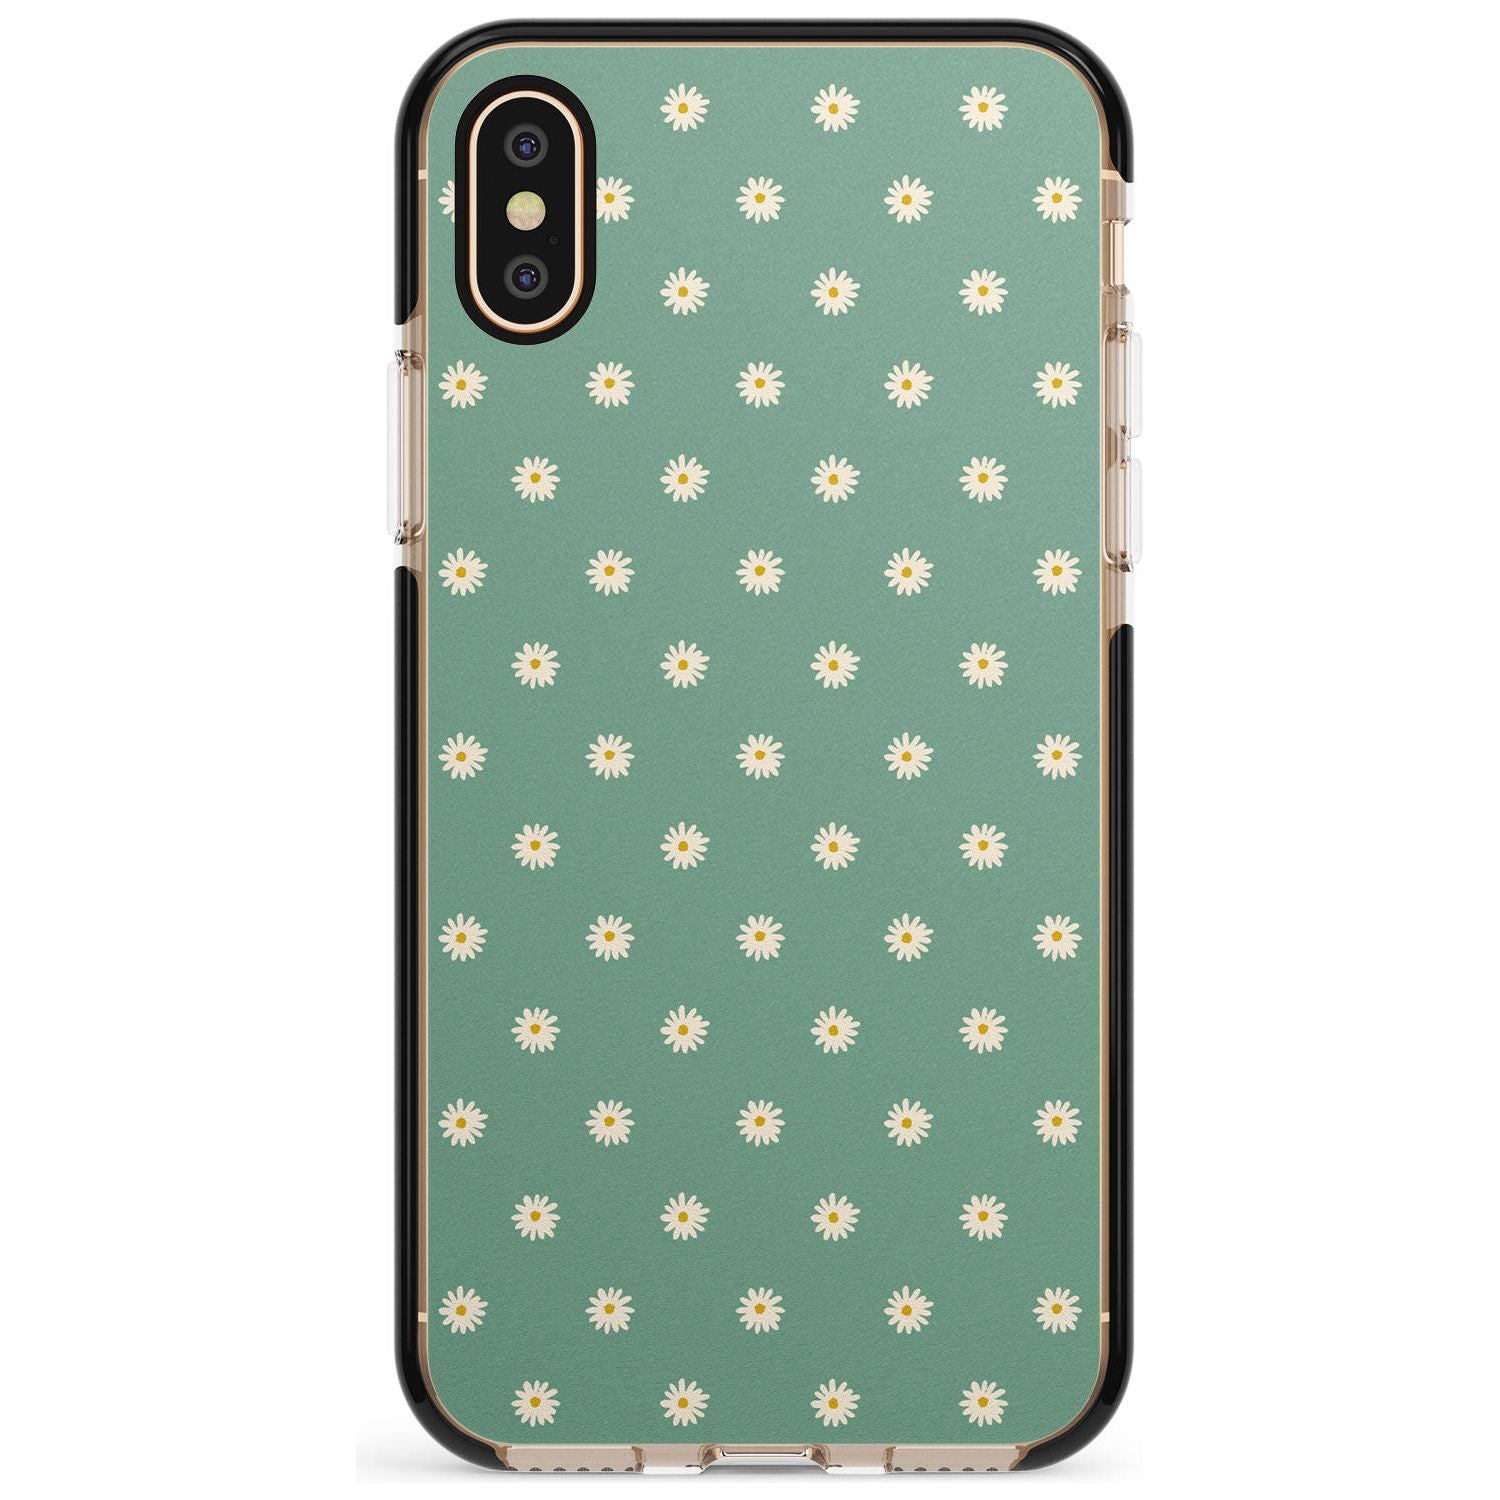 Daisy Pattern - Teal Cute Floral Daisy Design Pink Fade Impact Phone Case for iPhone X XS Max XR